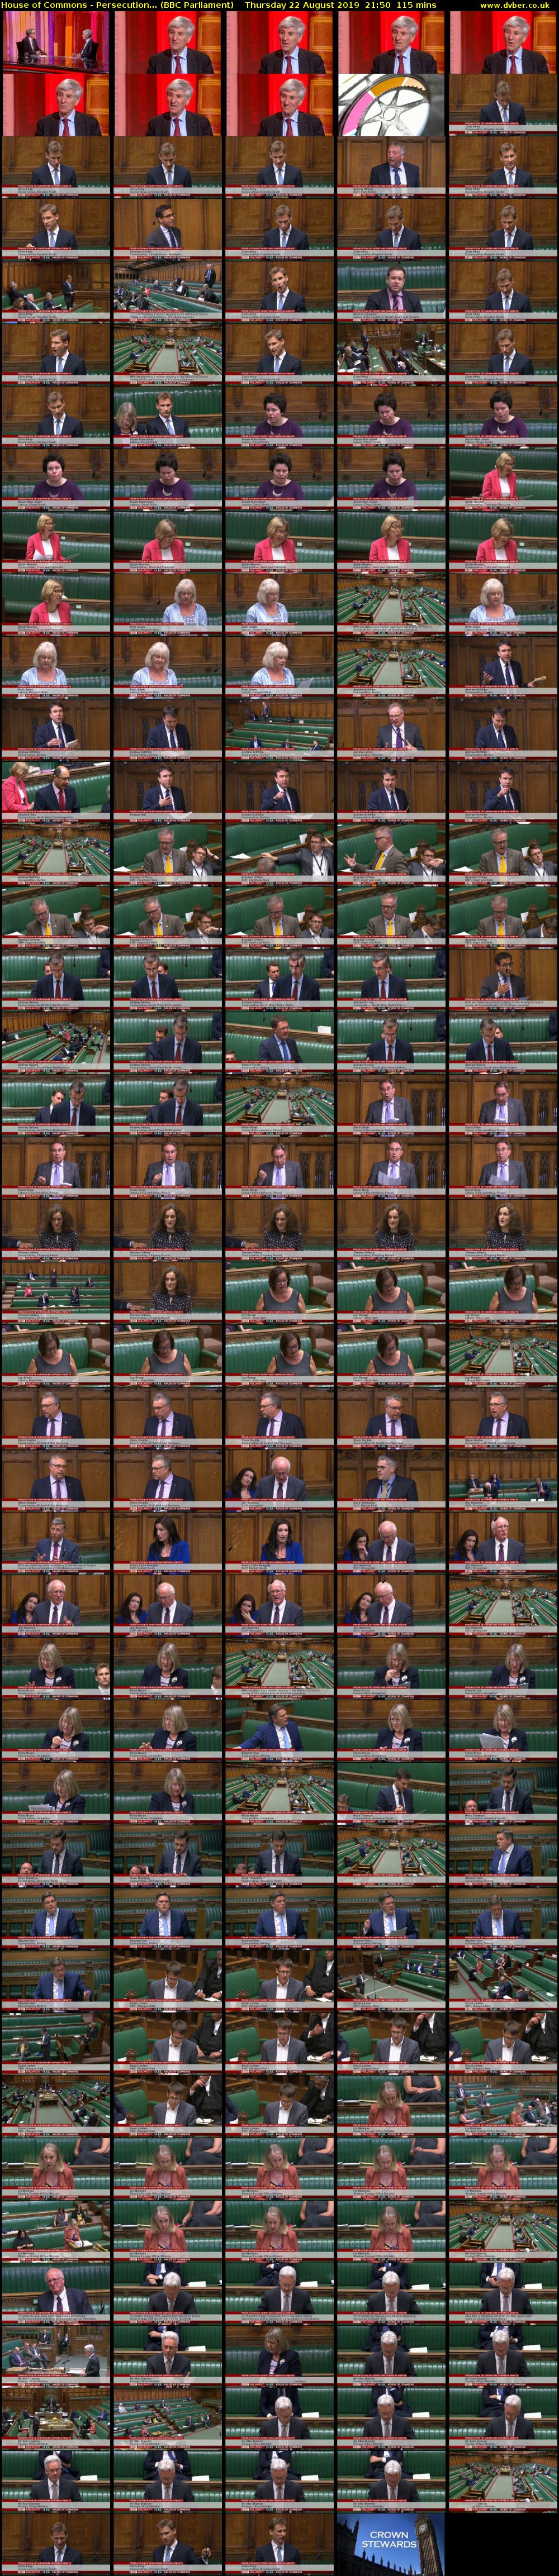 House of Commons - Persecution... (BBC Parliament) Thursday 22 August 2019 21:50 - 23:45